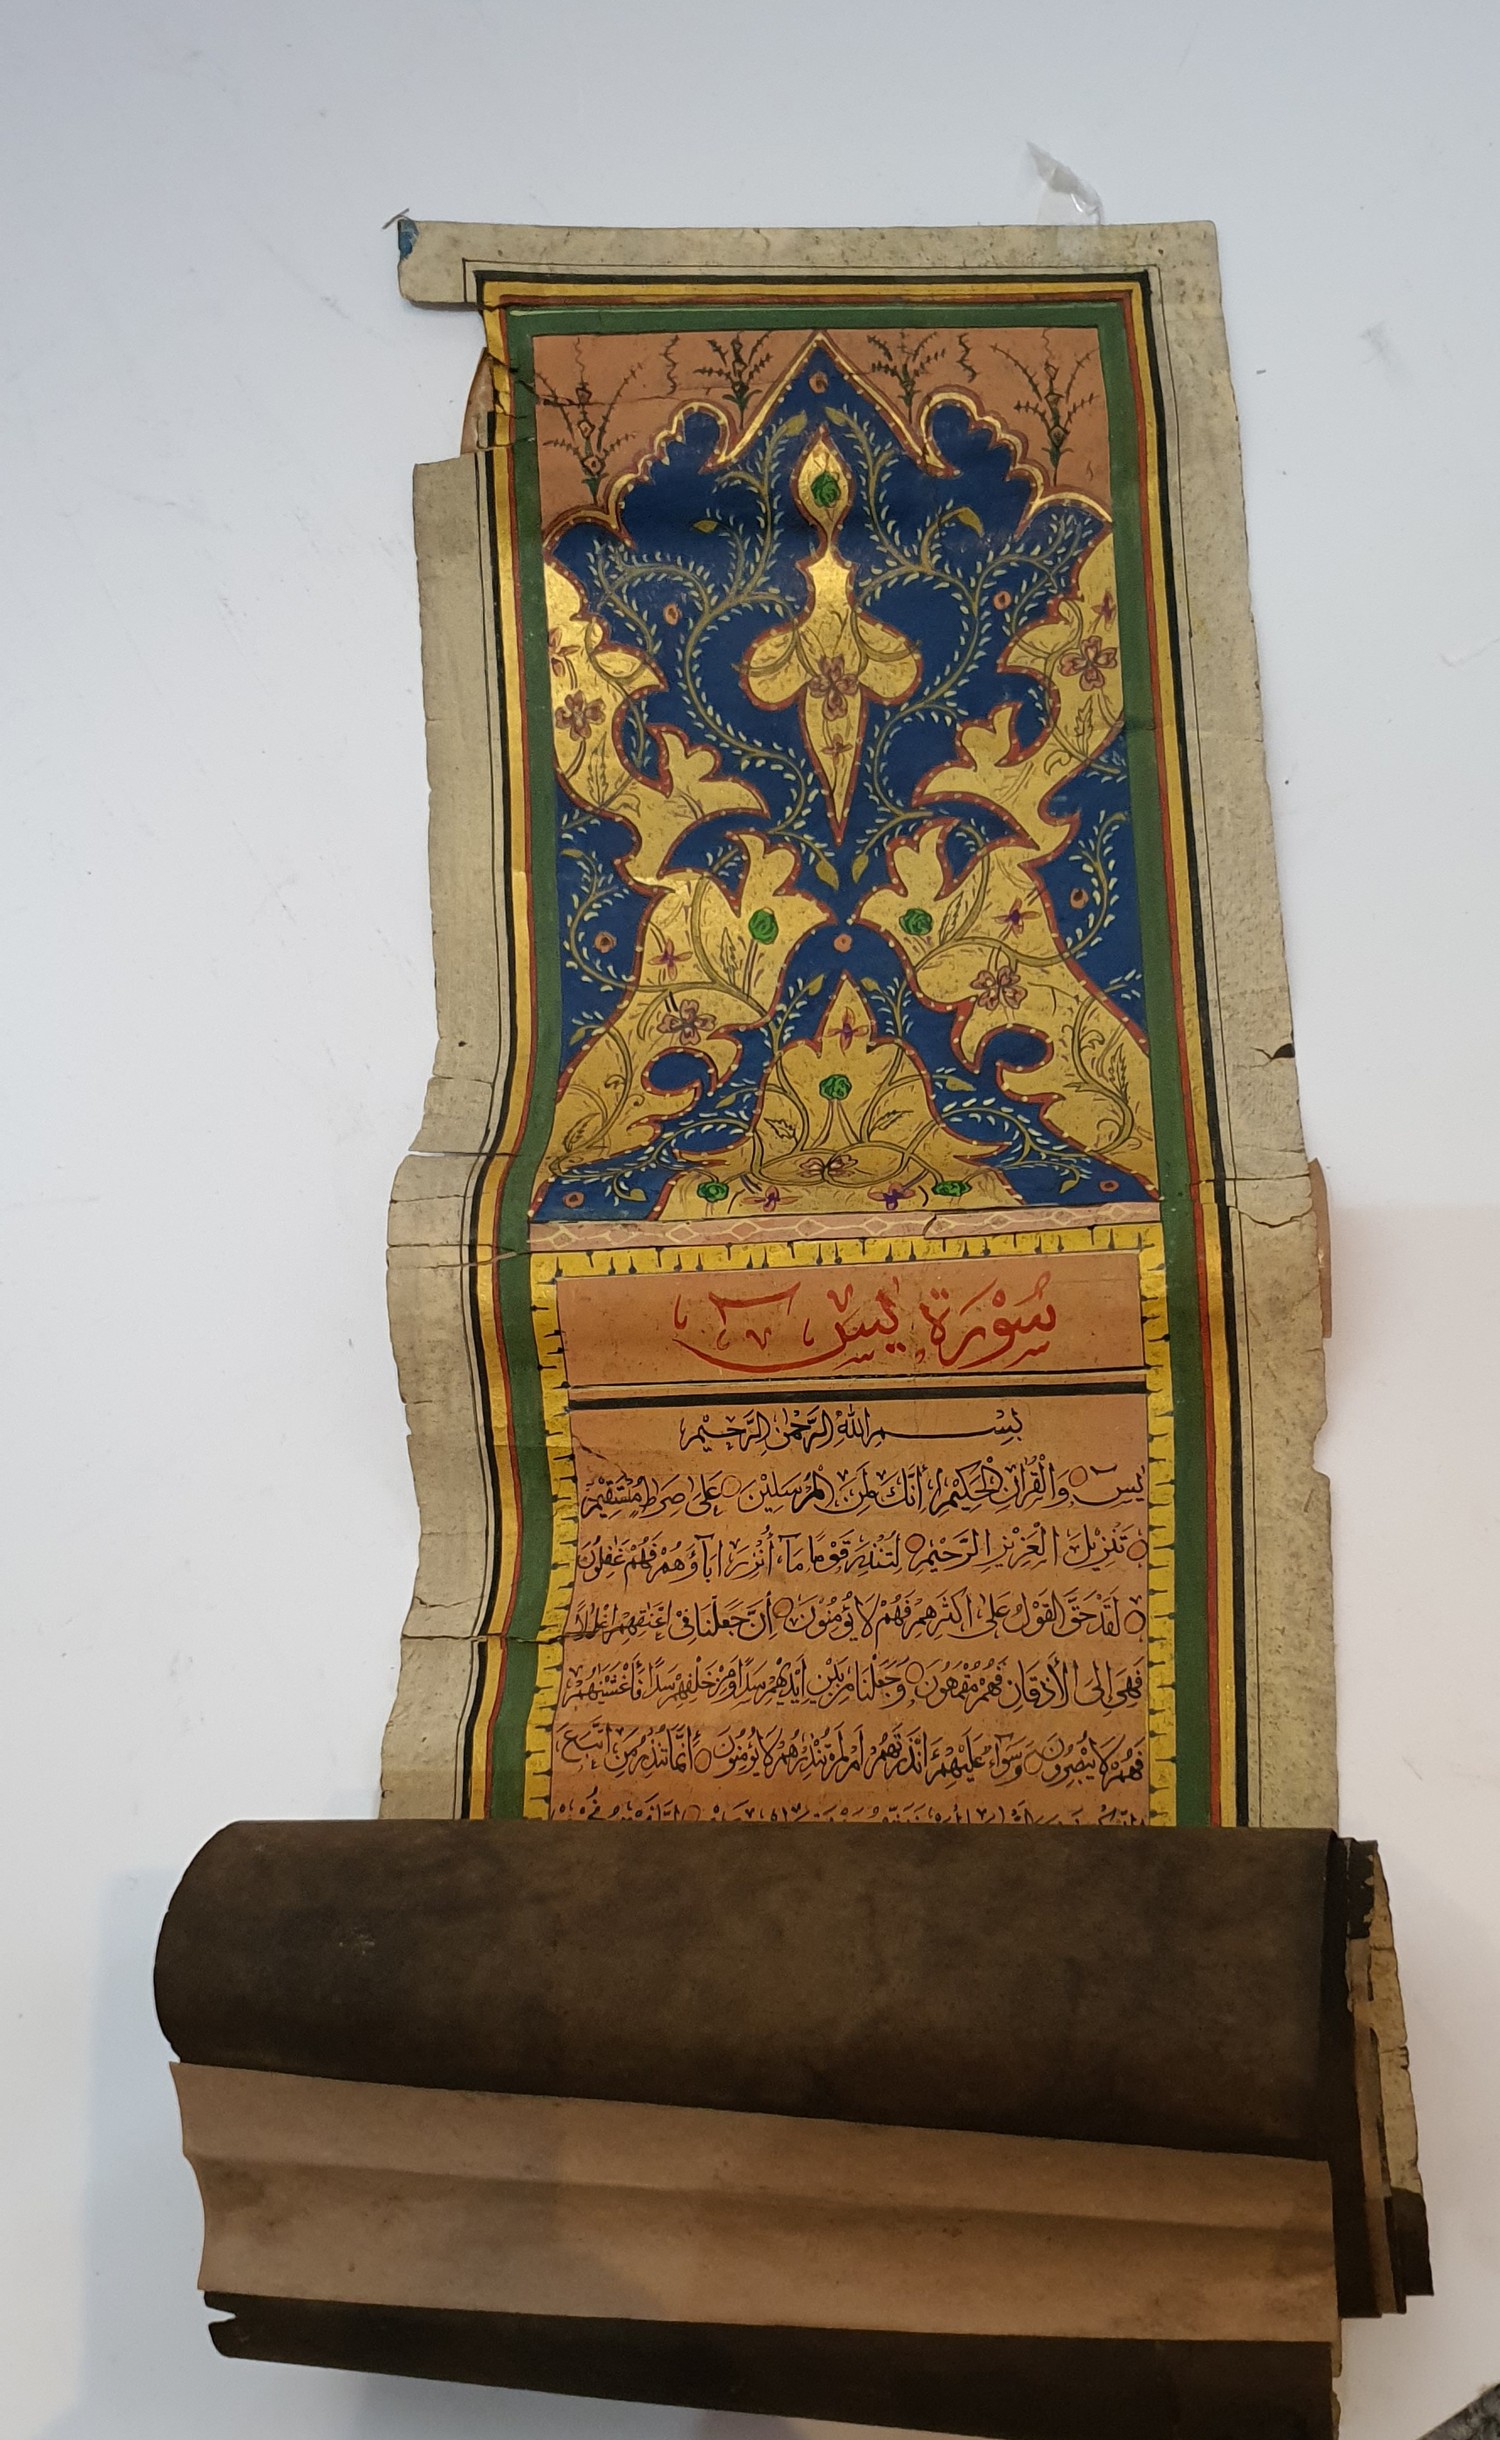 Circa 1900, an Indian Arabic calligraphic manuscript scroll, the title 'Sourate Ya Sin' in red - Image 6 of 6